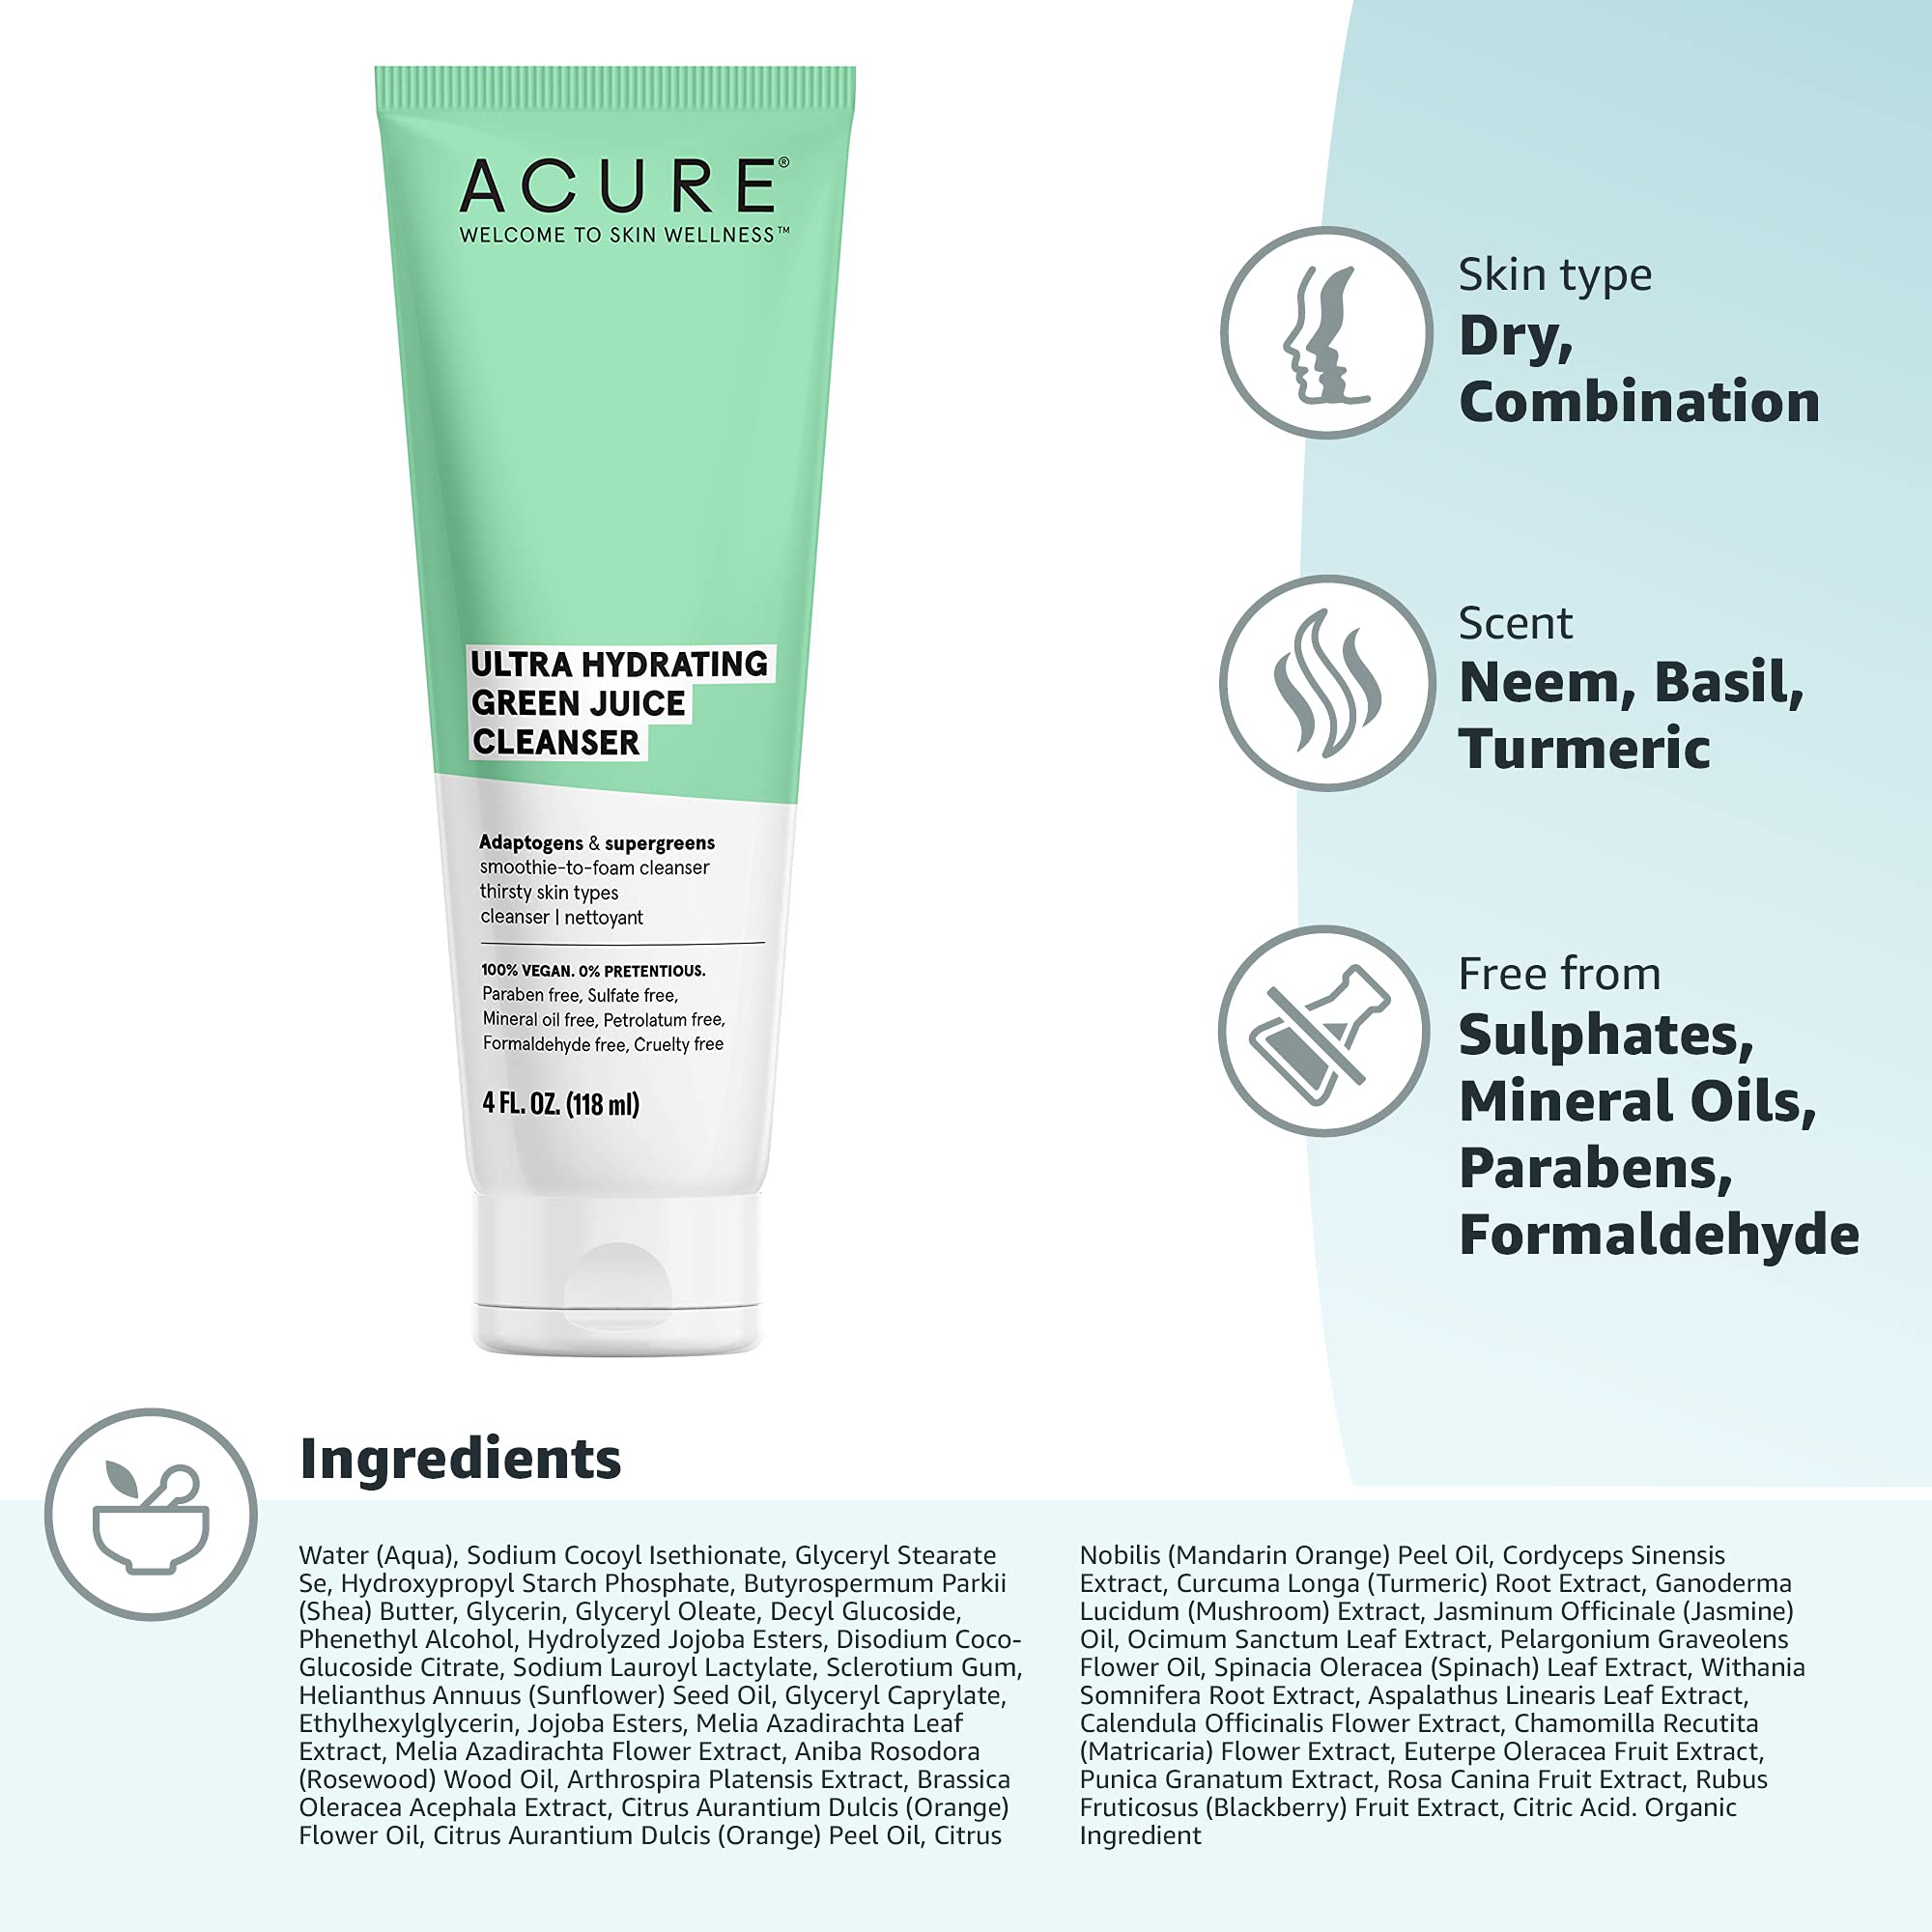 ACURE Ultra Hydrating Green Juice Cleanser | 100% Vegan | Intense Moisture for Super Thirsty Skin | Supergreens & Adaptogens - Purifies, Deep Cleanses & Refreshes | 4Fl Oz